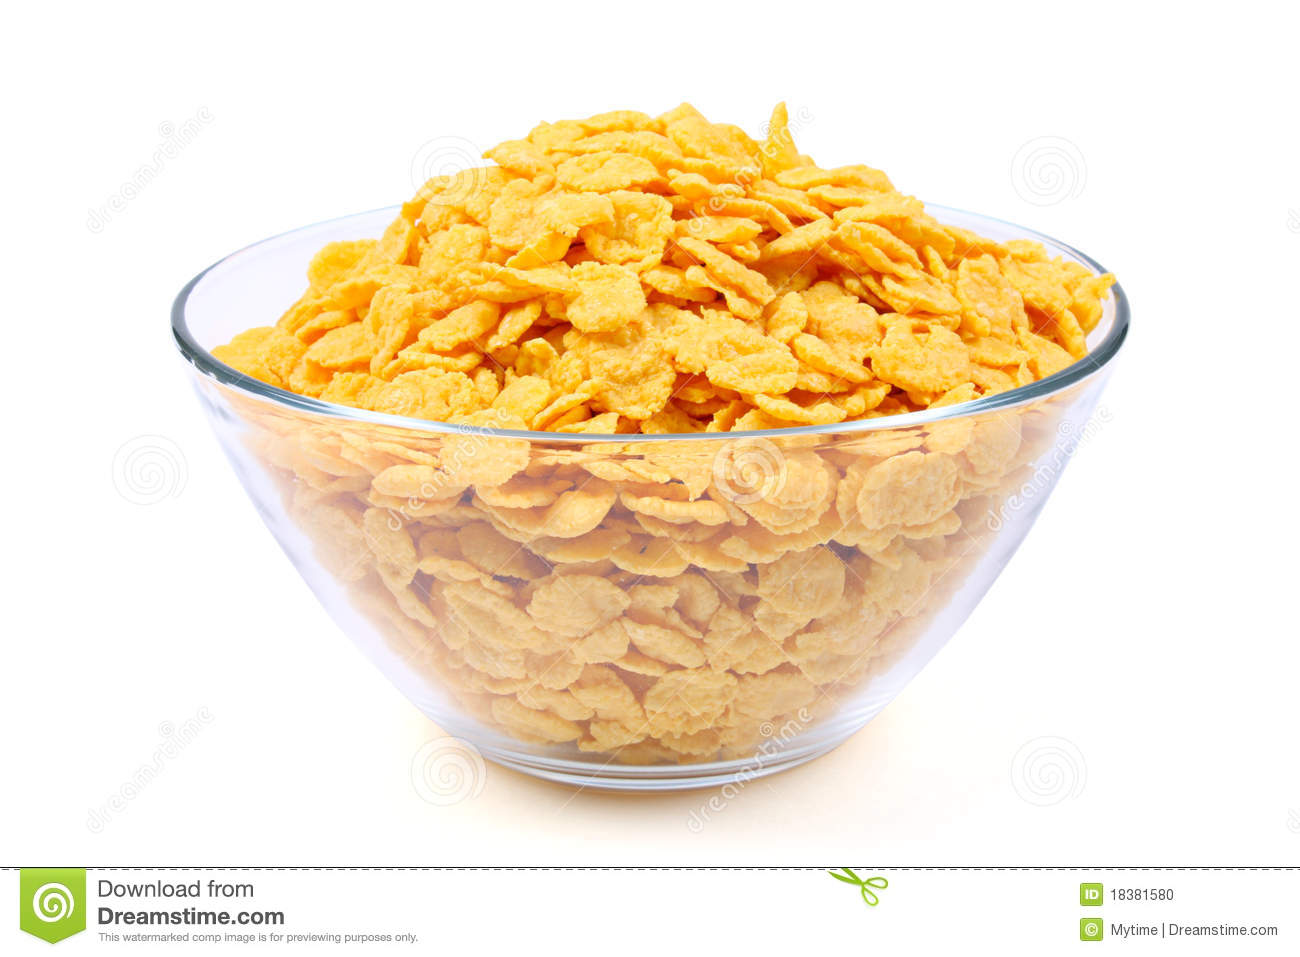 Corn Flakes In Bowl Stock Photo   Image  18381580